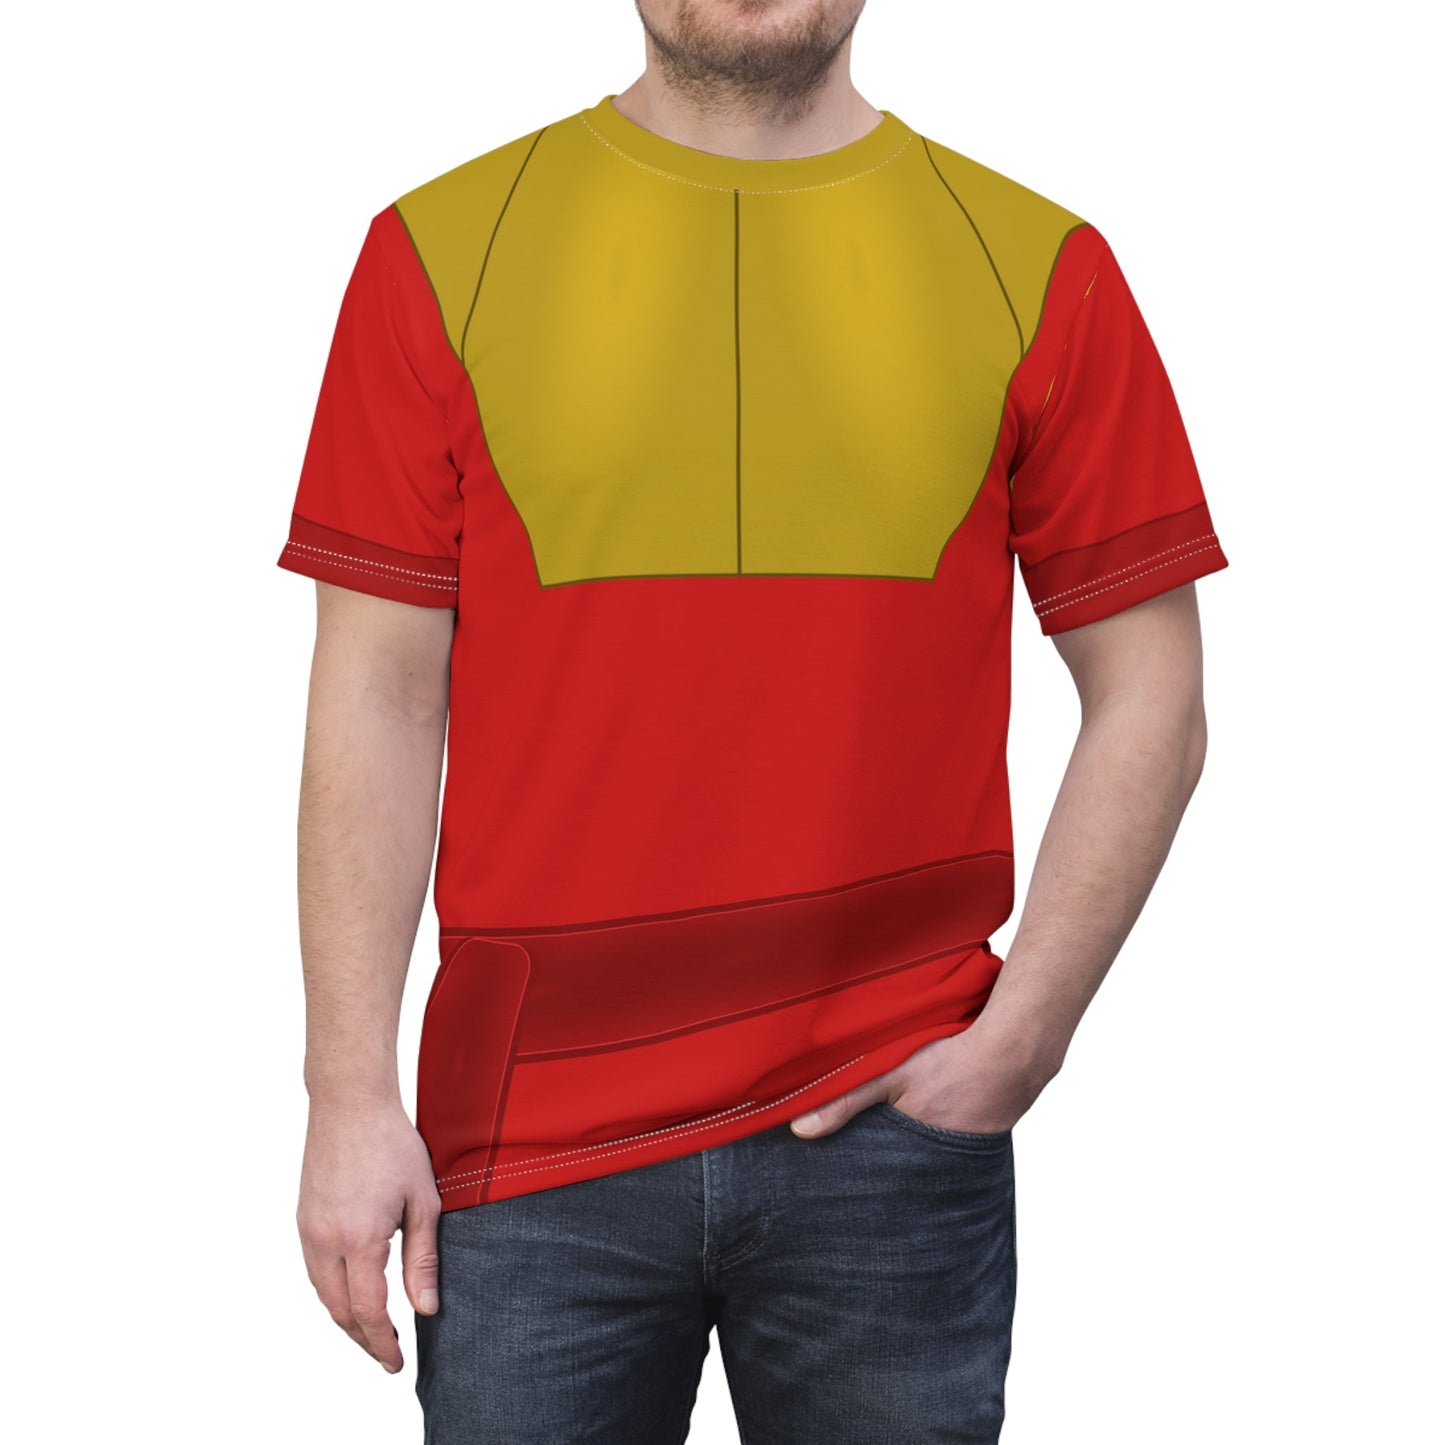 The Kuzco Unisex Tee- Cosplay, Bounding, Running Costume adult disneyAll Over PrintAOP Clothing#tag4##tag5##tag6#